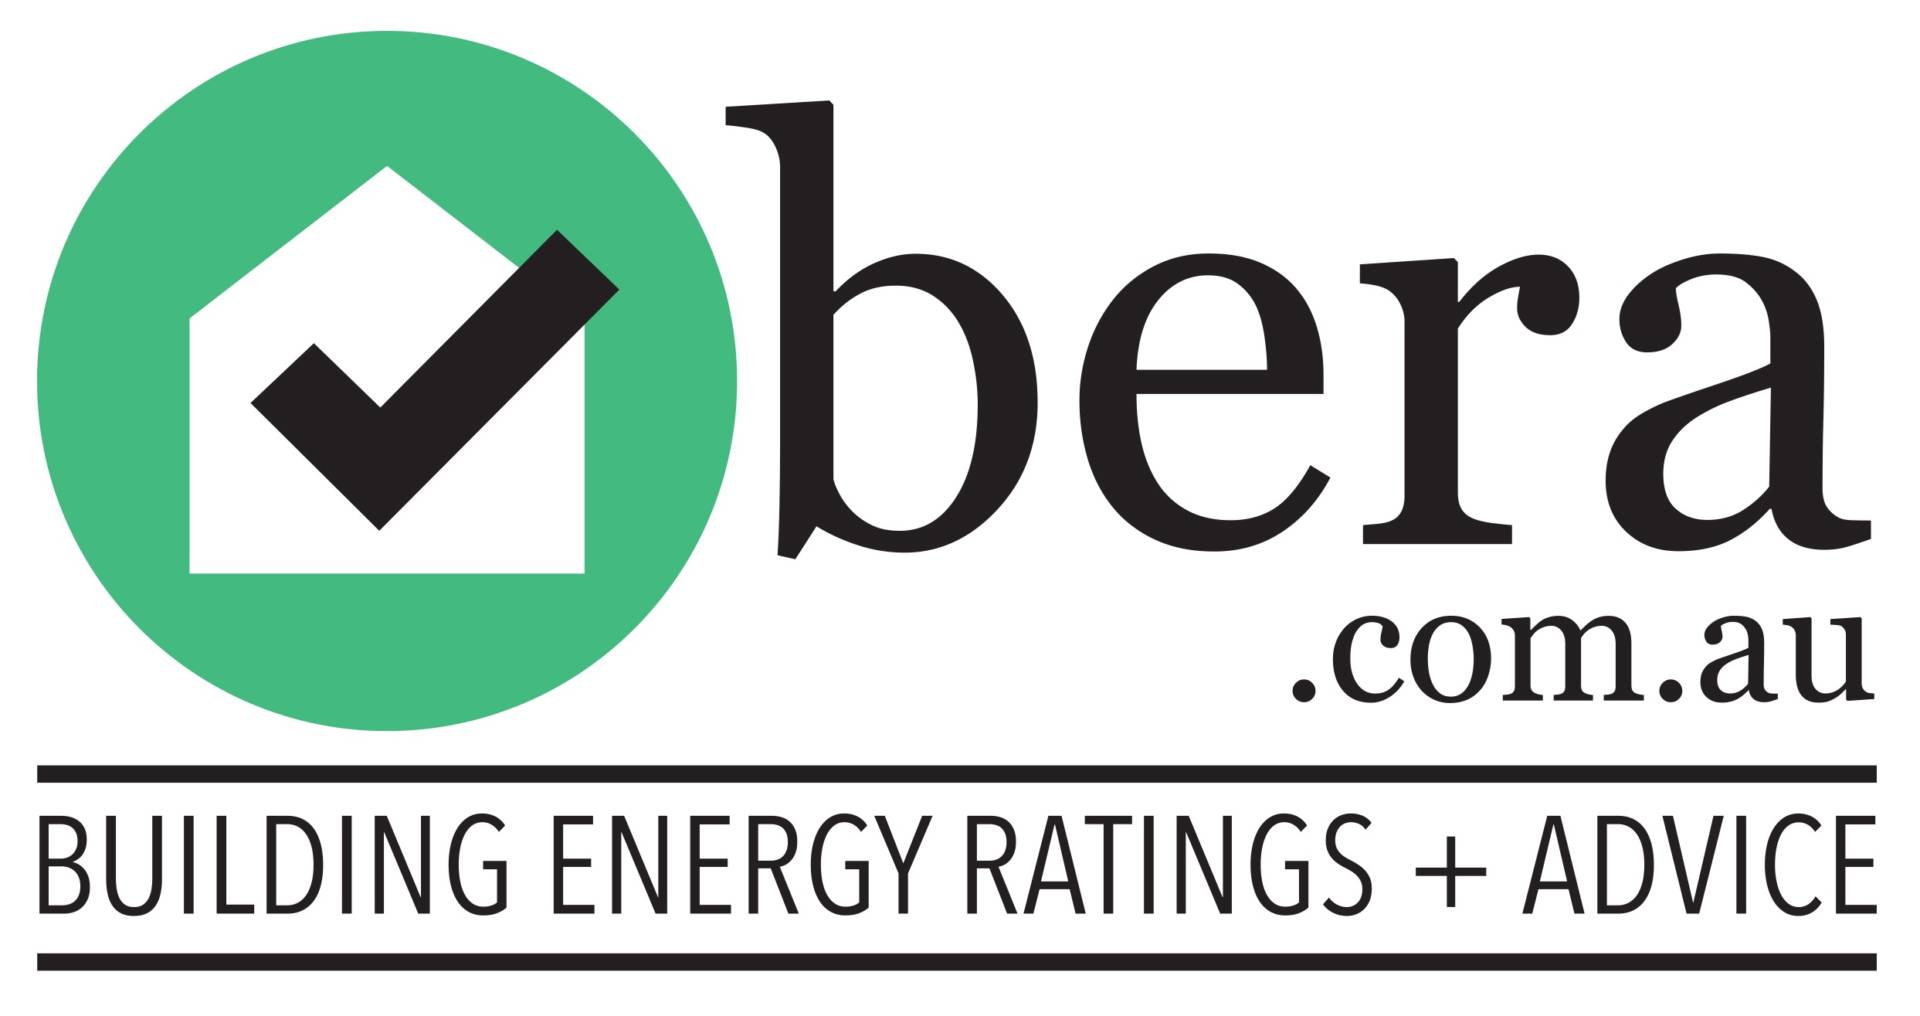 Building Energy Ratings and Advice